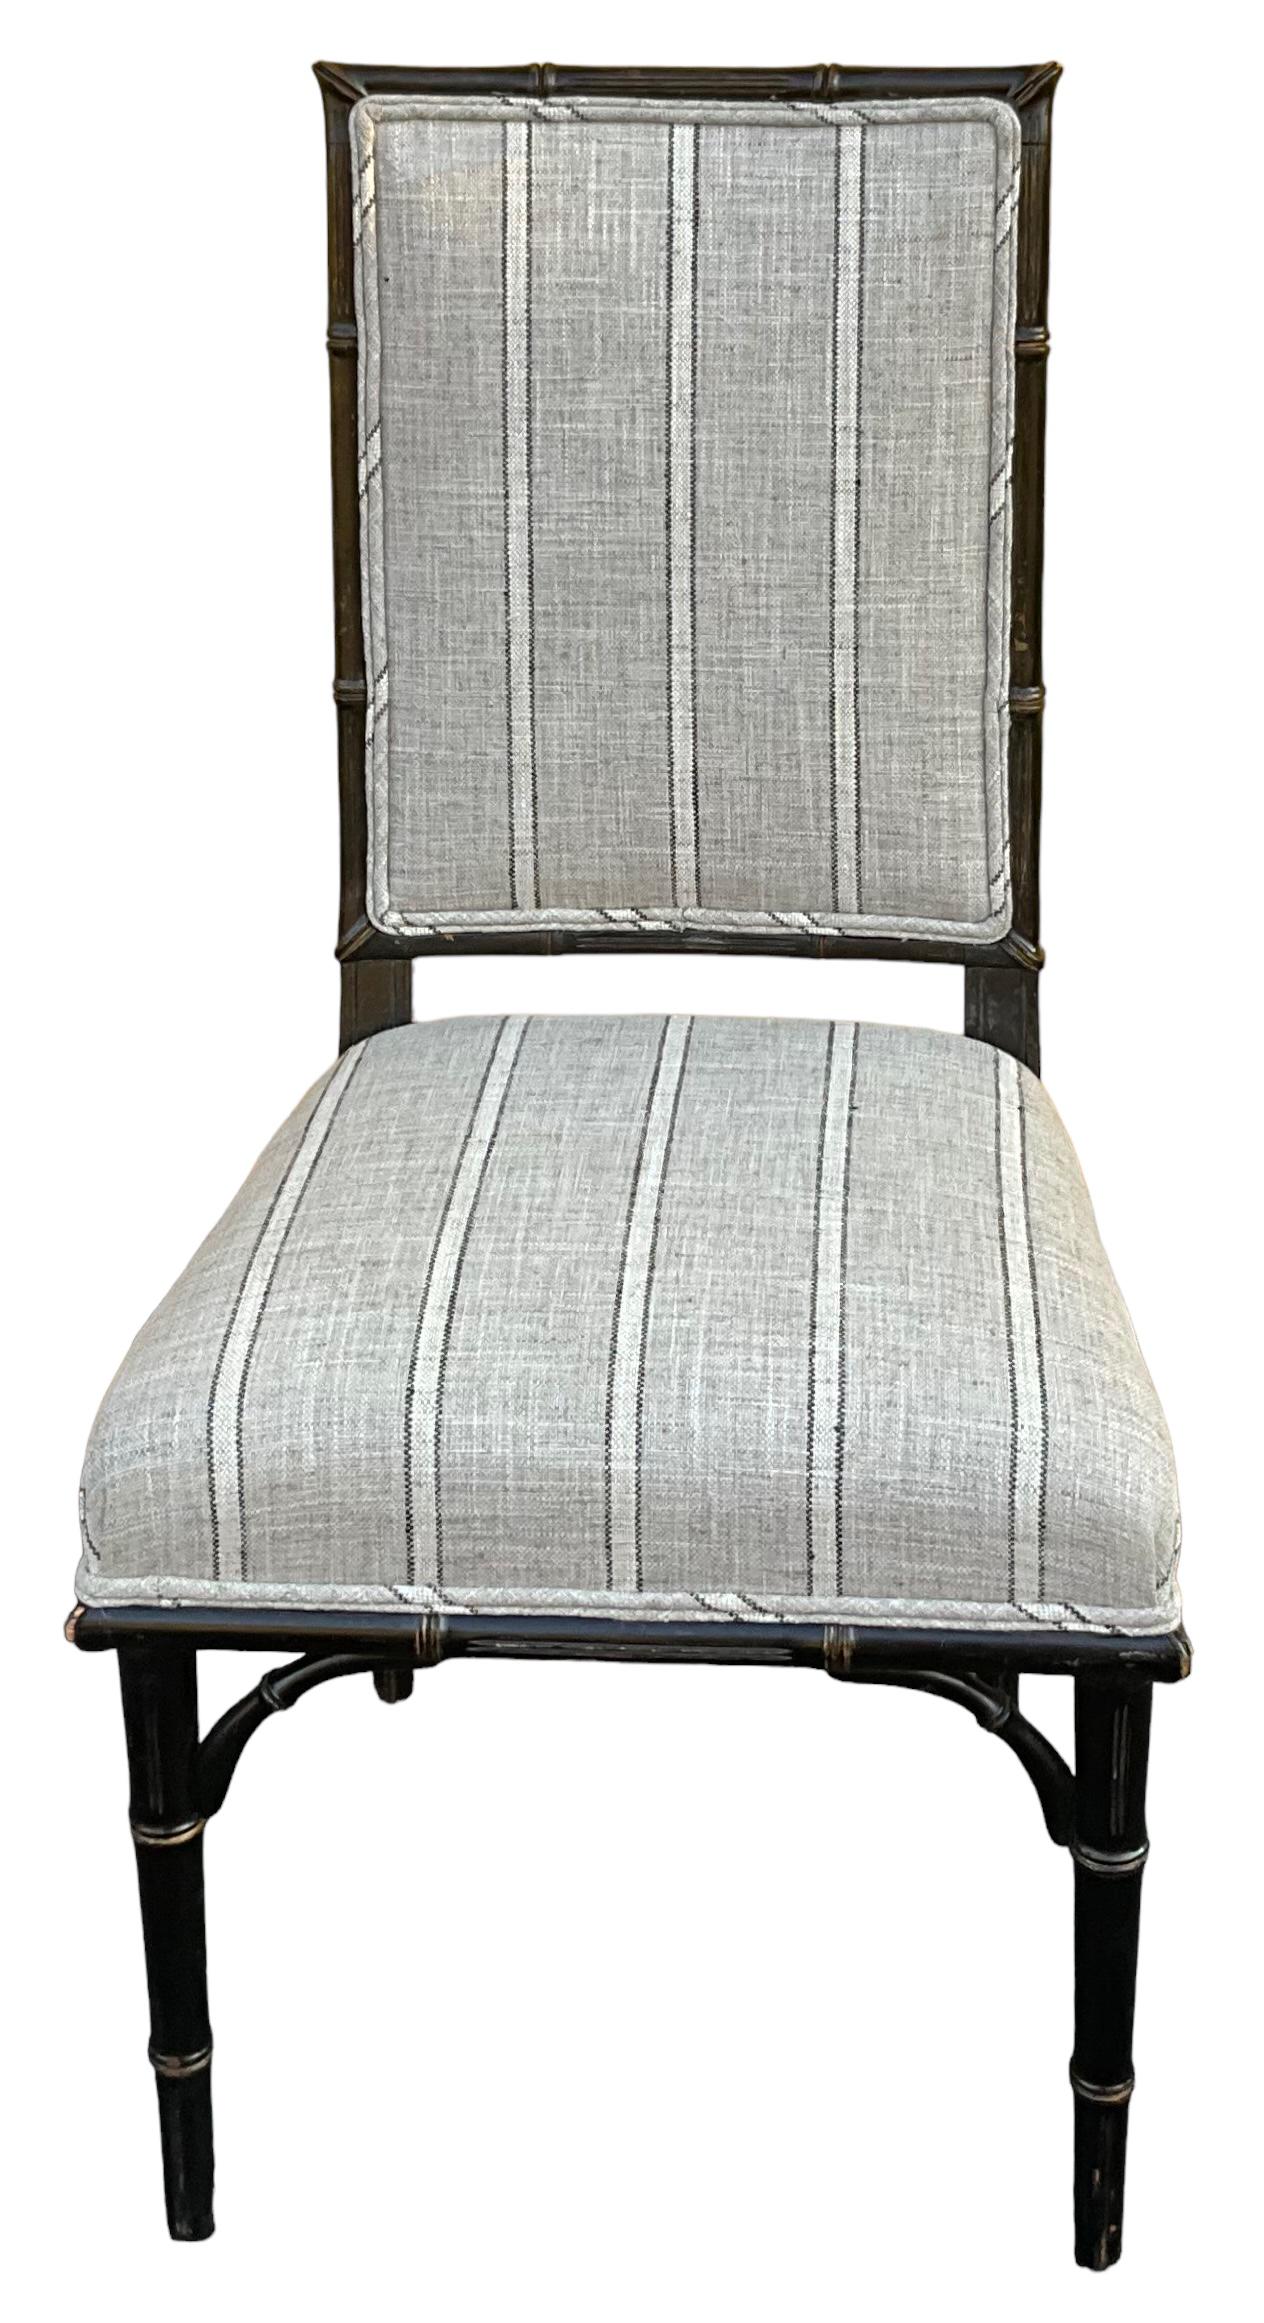 English Early 20th-C. Regency Style Ebonized Faux Bamboo Side Chairs In Linen -Pair For Sale